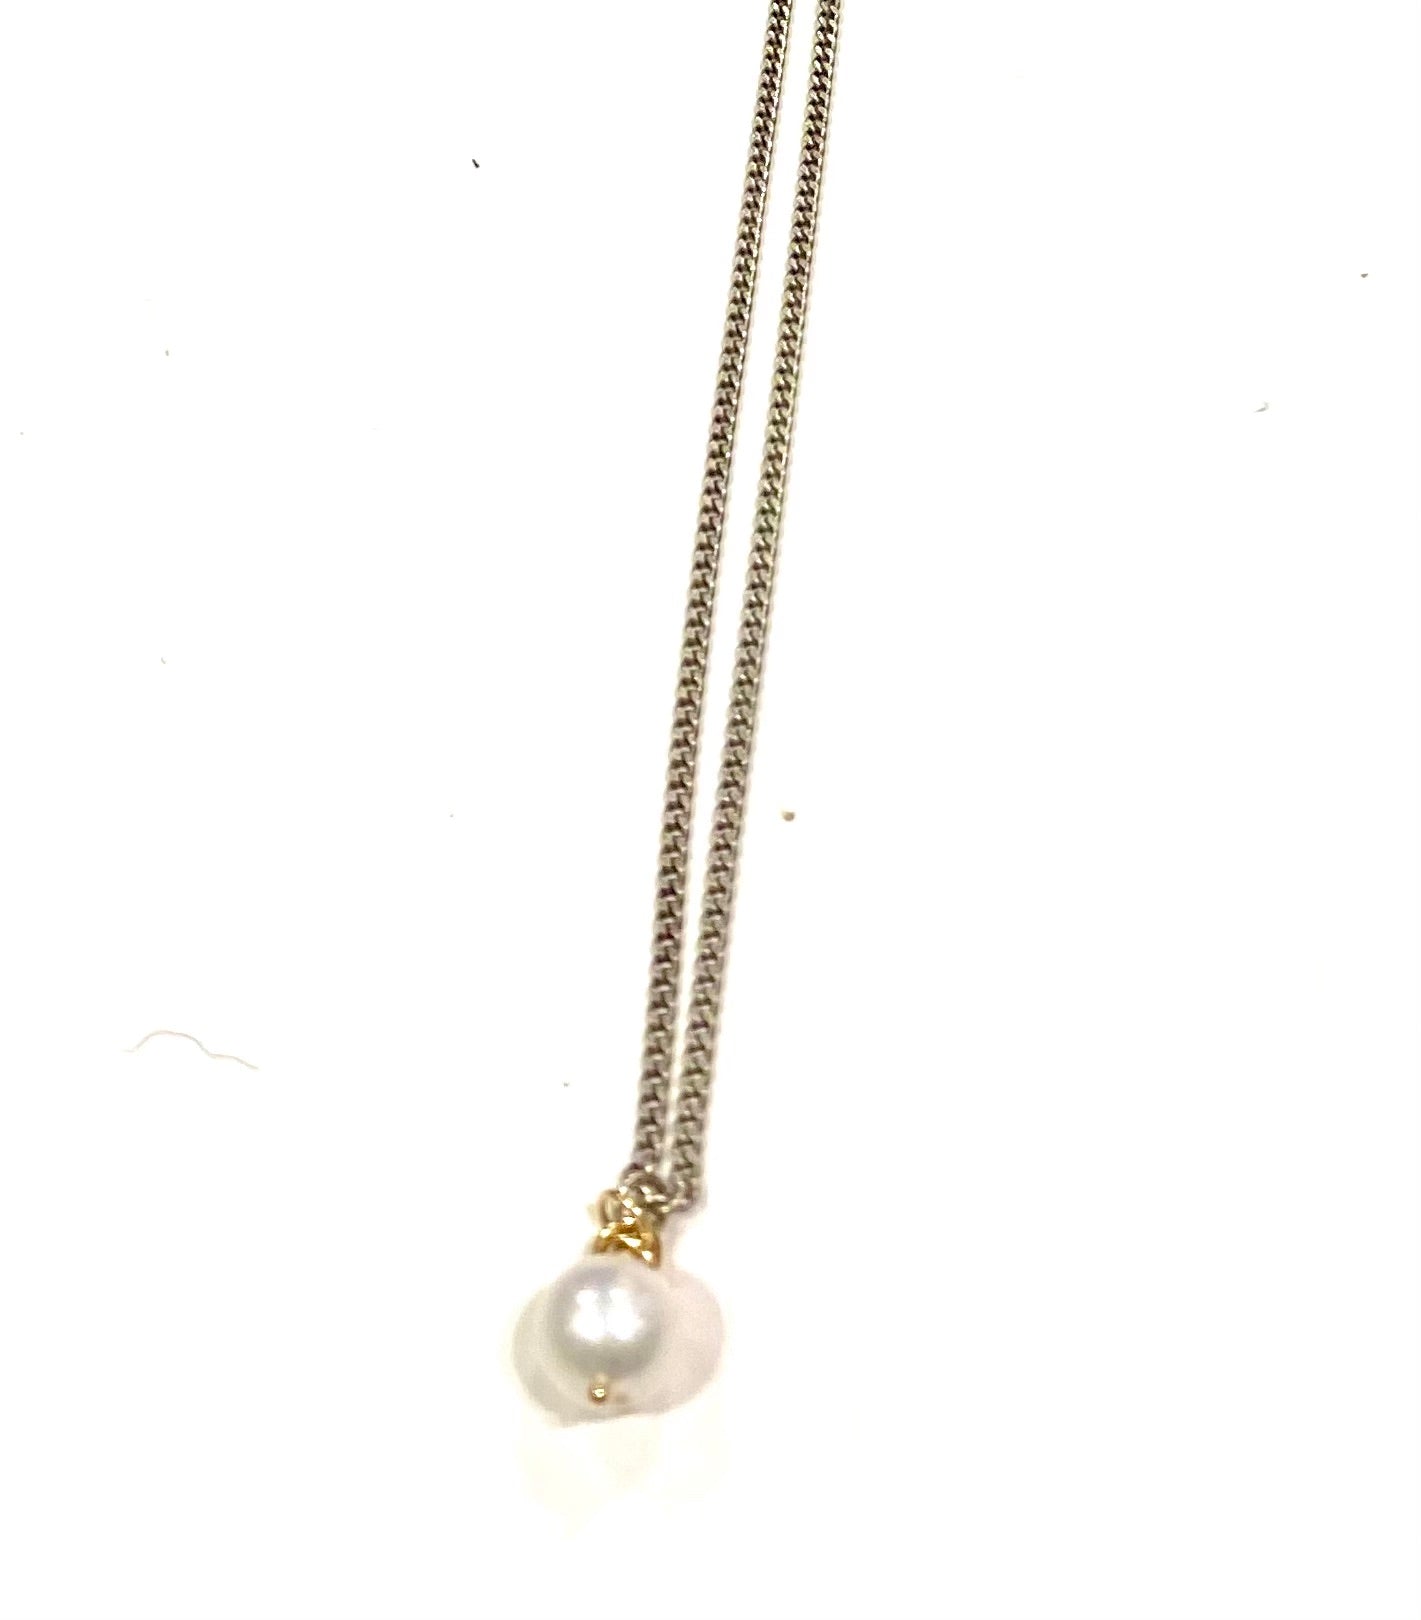 Katie - necklace with wire-wrapped pearl drop